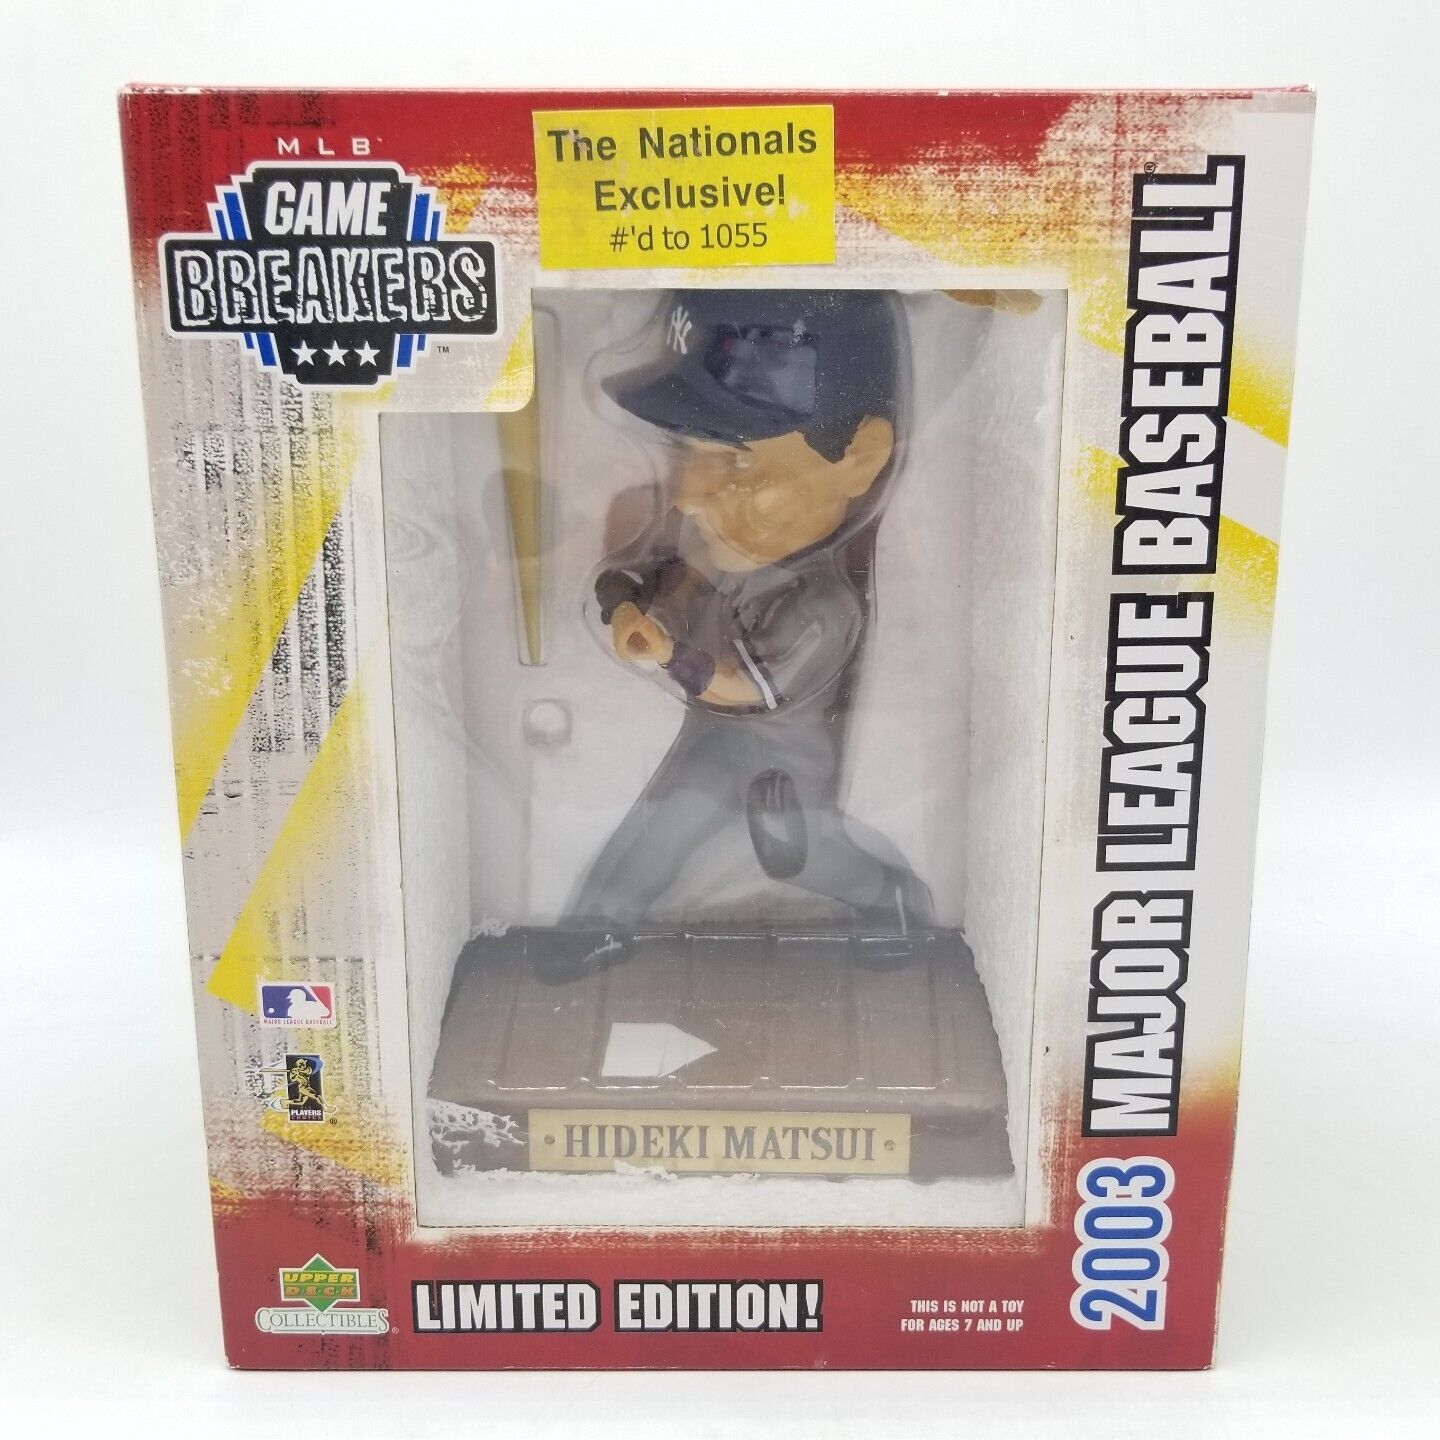 MLB Game Breakers HIDEKI MATSUI Limited Ed. The Nationals Exclusive /1055 Figure